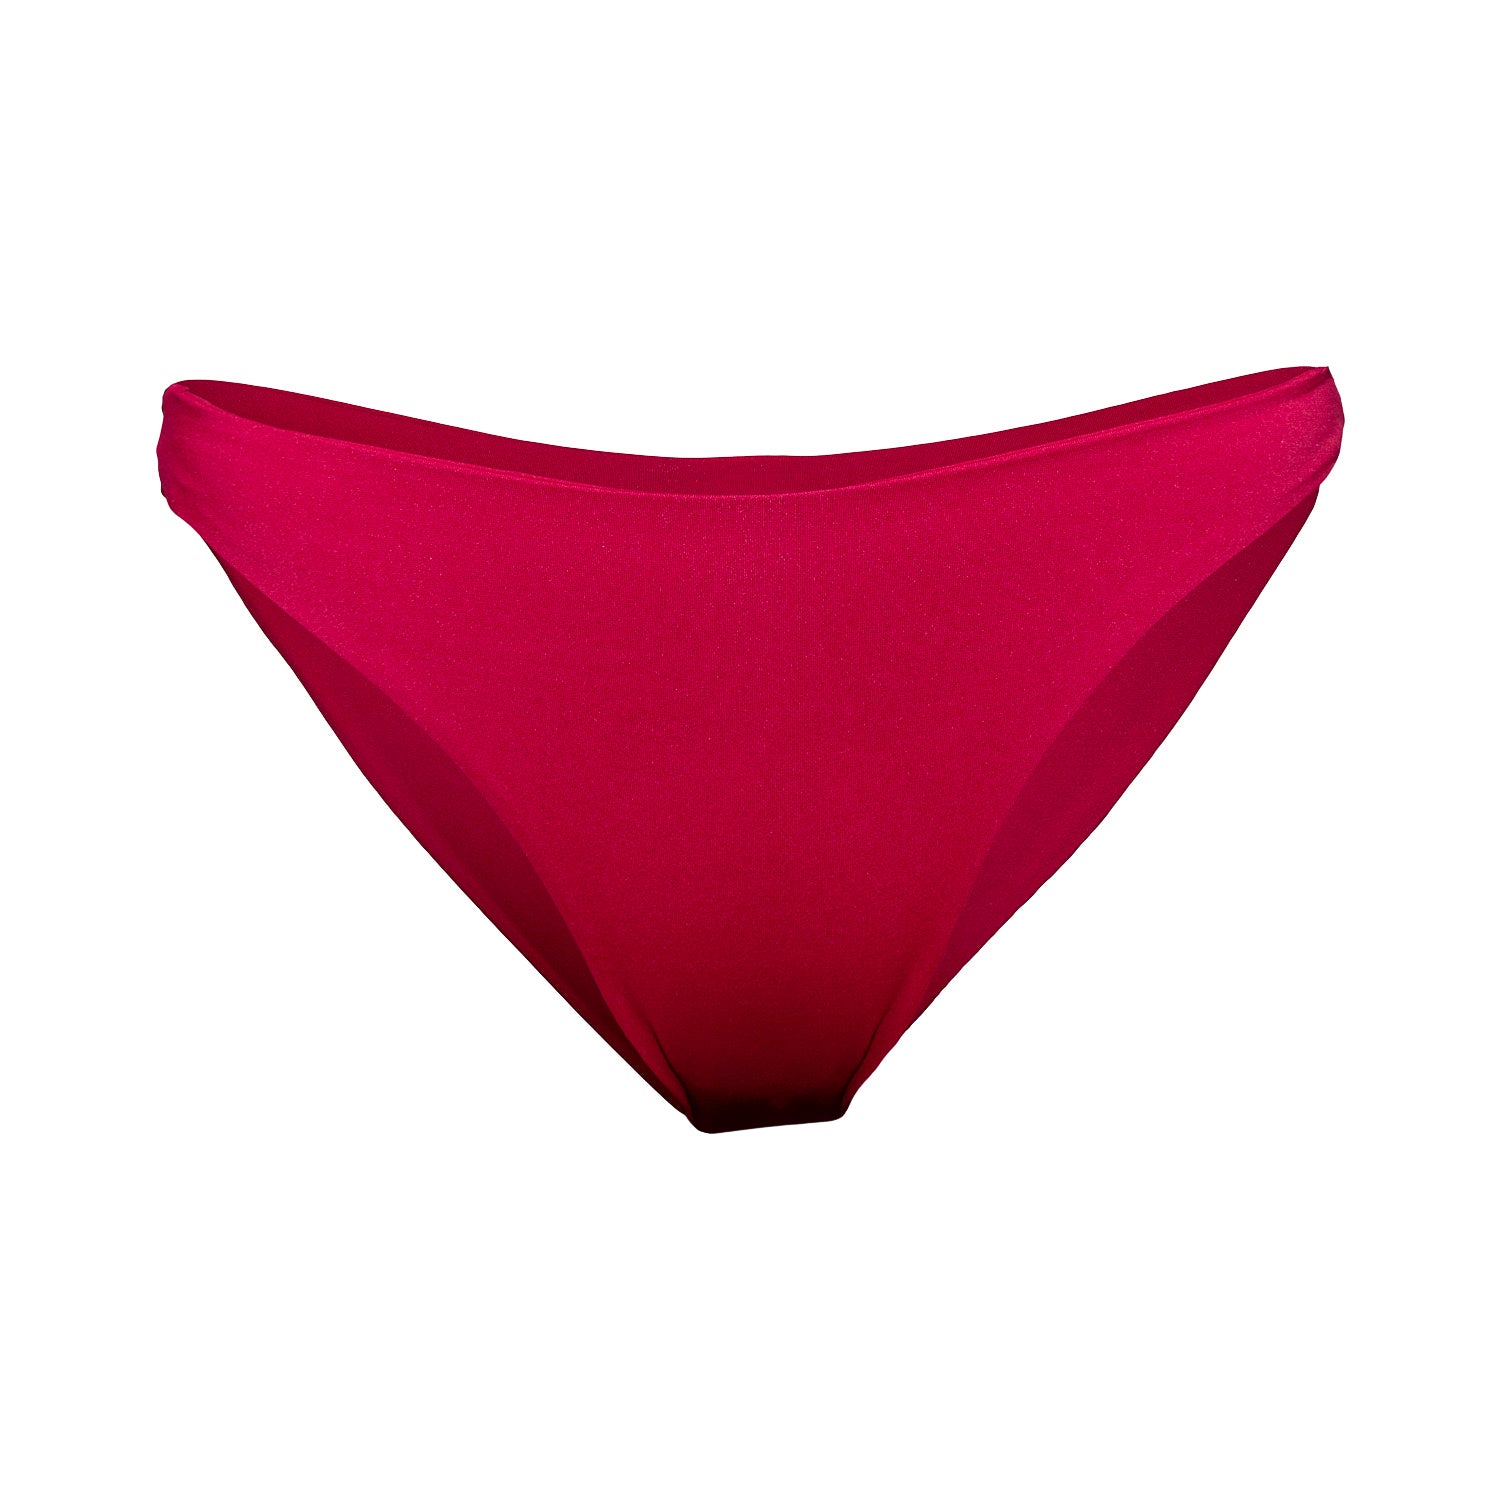 Women's Coral Bikini Bottoms - Red Extra Small REEDEFIN